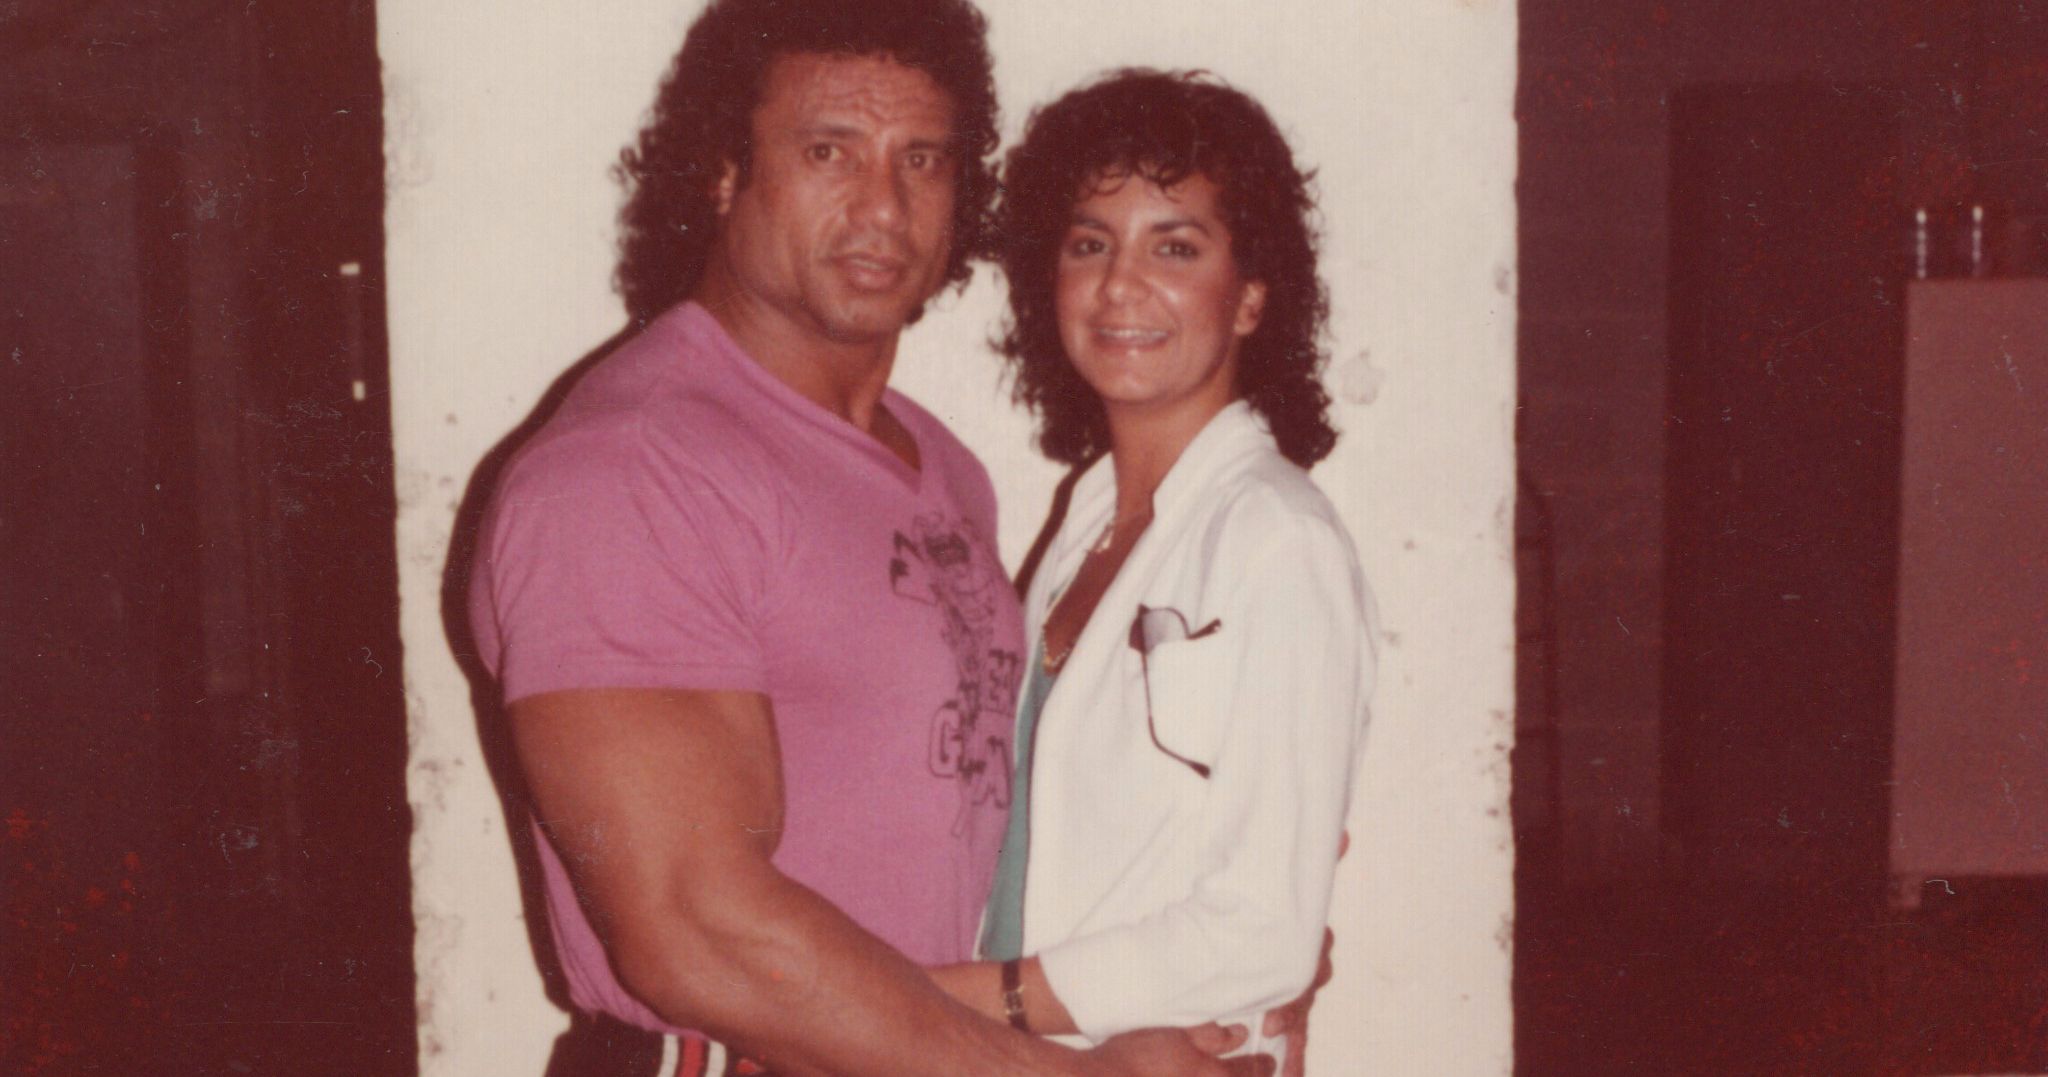 Dark Side of the Ring Episode 2.4 Trailer Explores Jimmy Snuka and the Death of Nancy Argentino